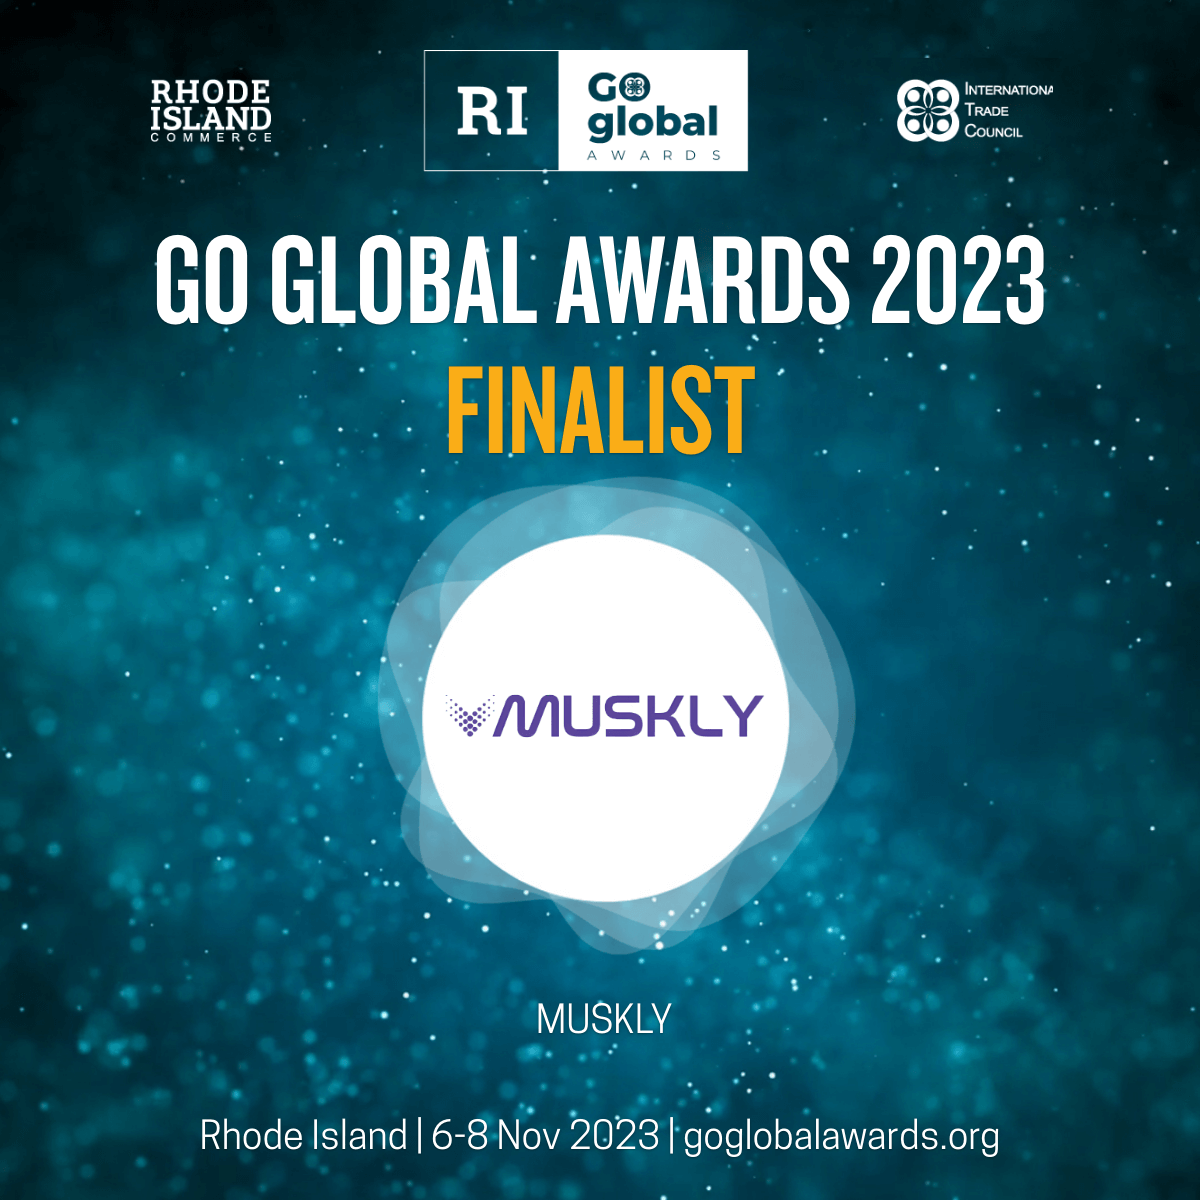 MUSKLY Digital Selected as a Finalist for the Prestigious 2023 Go Global Awards!